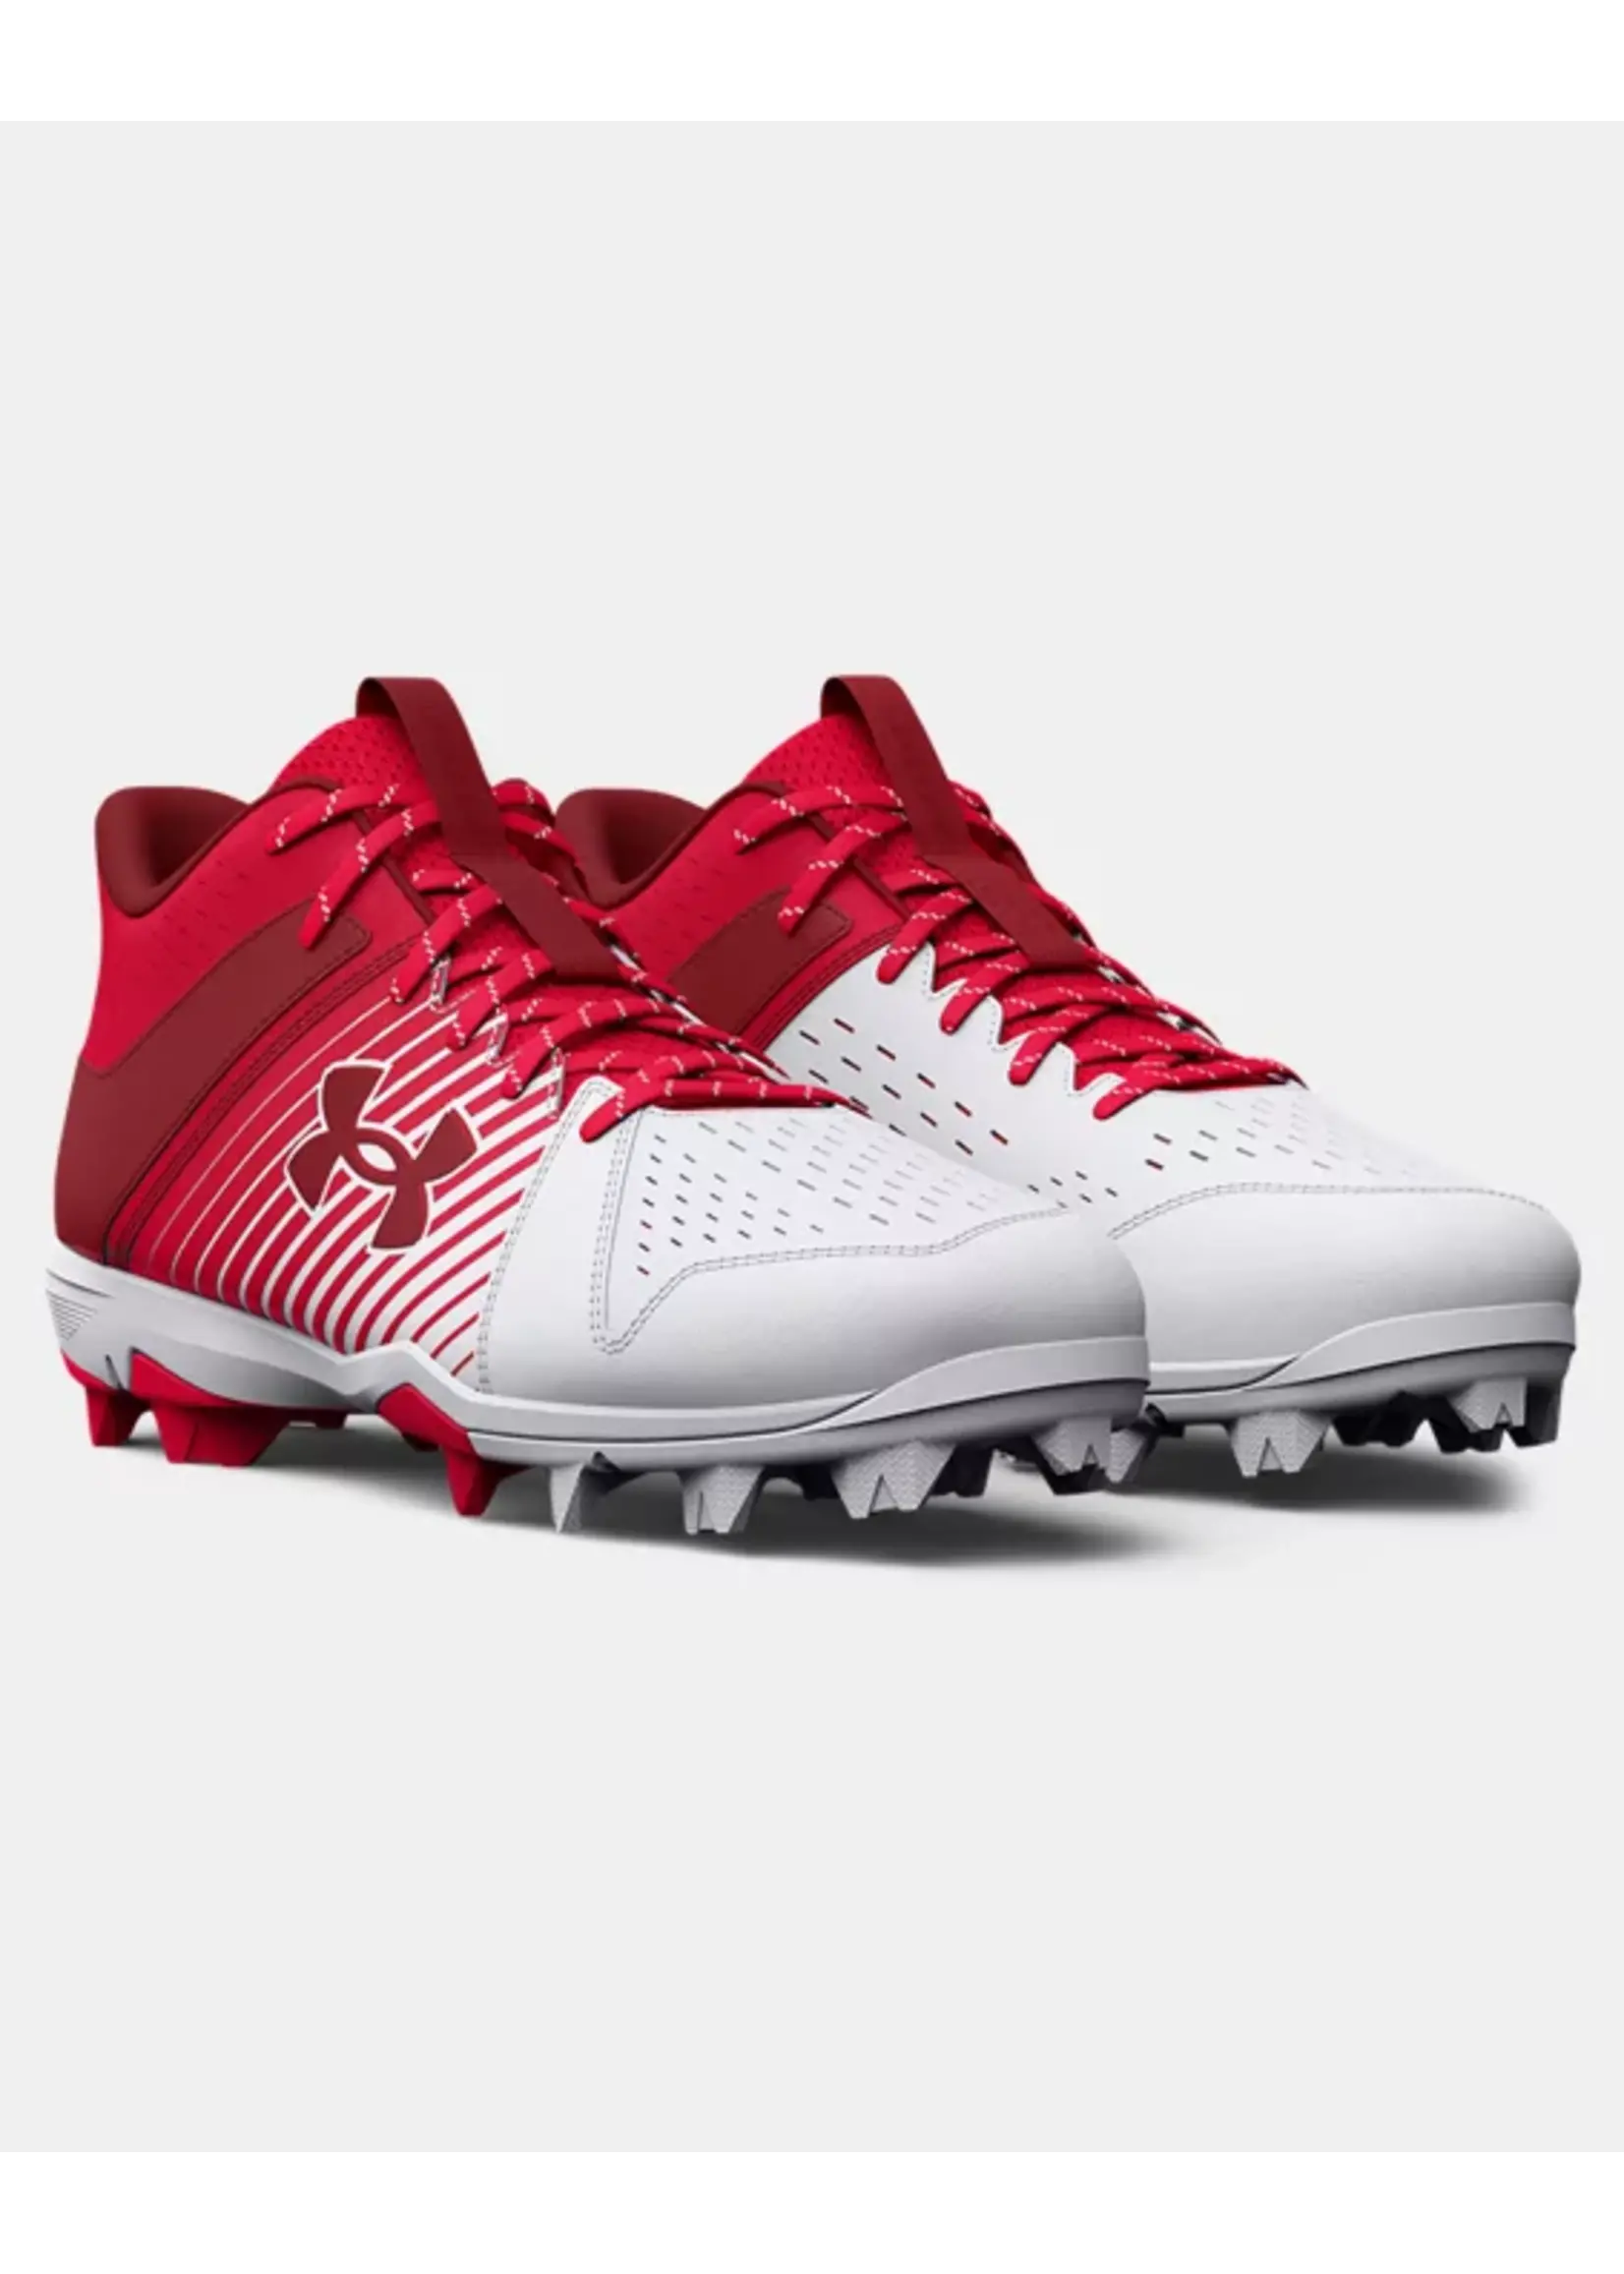 UNDER ARMOUR UNDER ARMOUR CLEAT MID BASEBALL LEADOFF MENS